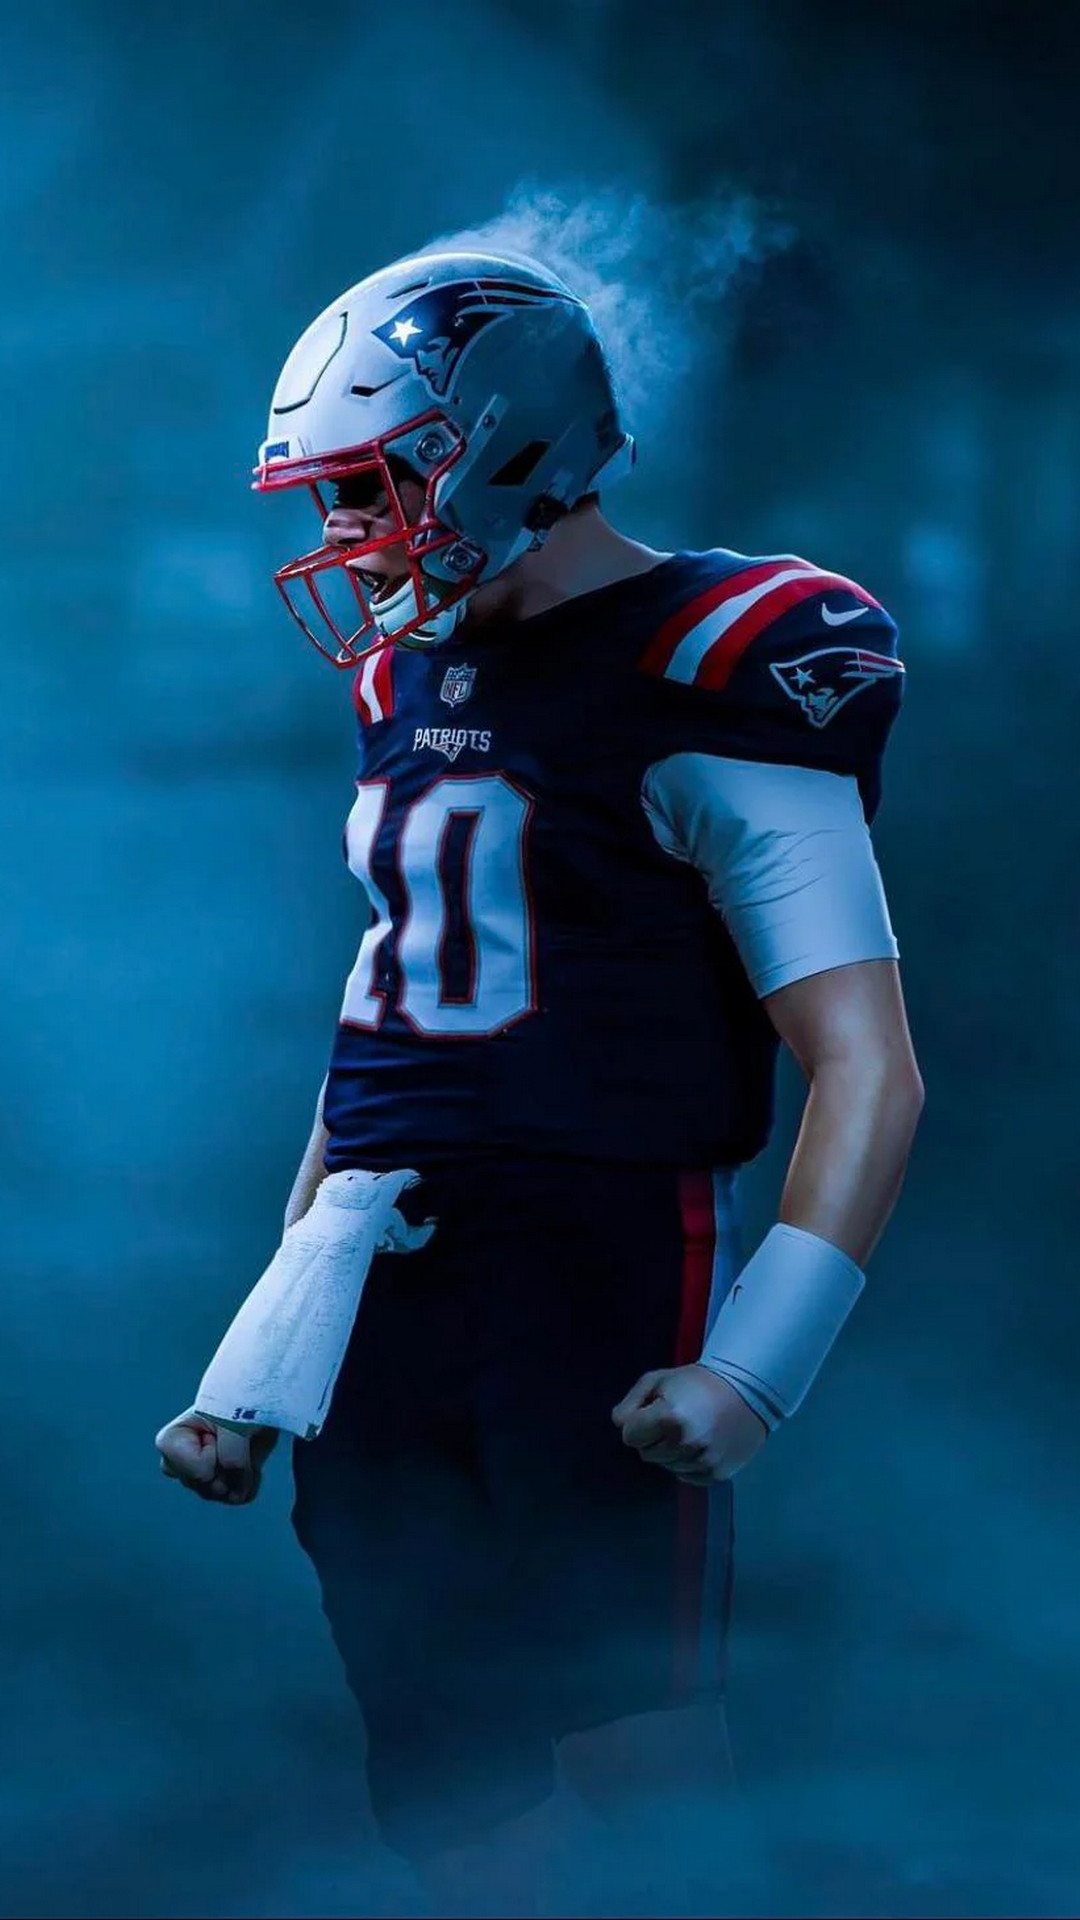 NE Patriots Mobile Wallpaper with high-resolution 1080x1920 pixel. You can use and set as wallpaper for Notebook Screensavers, Mac Wallpapers, Mobile Home Screen, iPhone or Android Phones Lock Screen